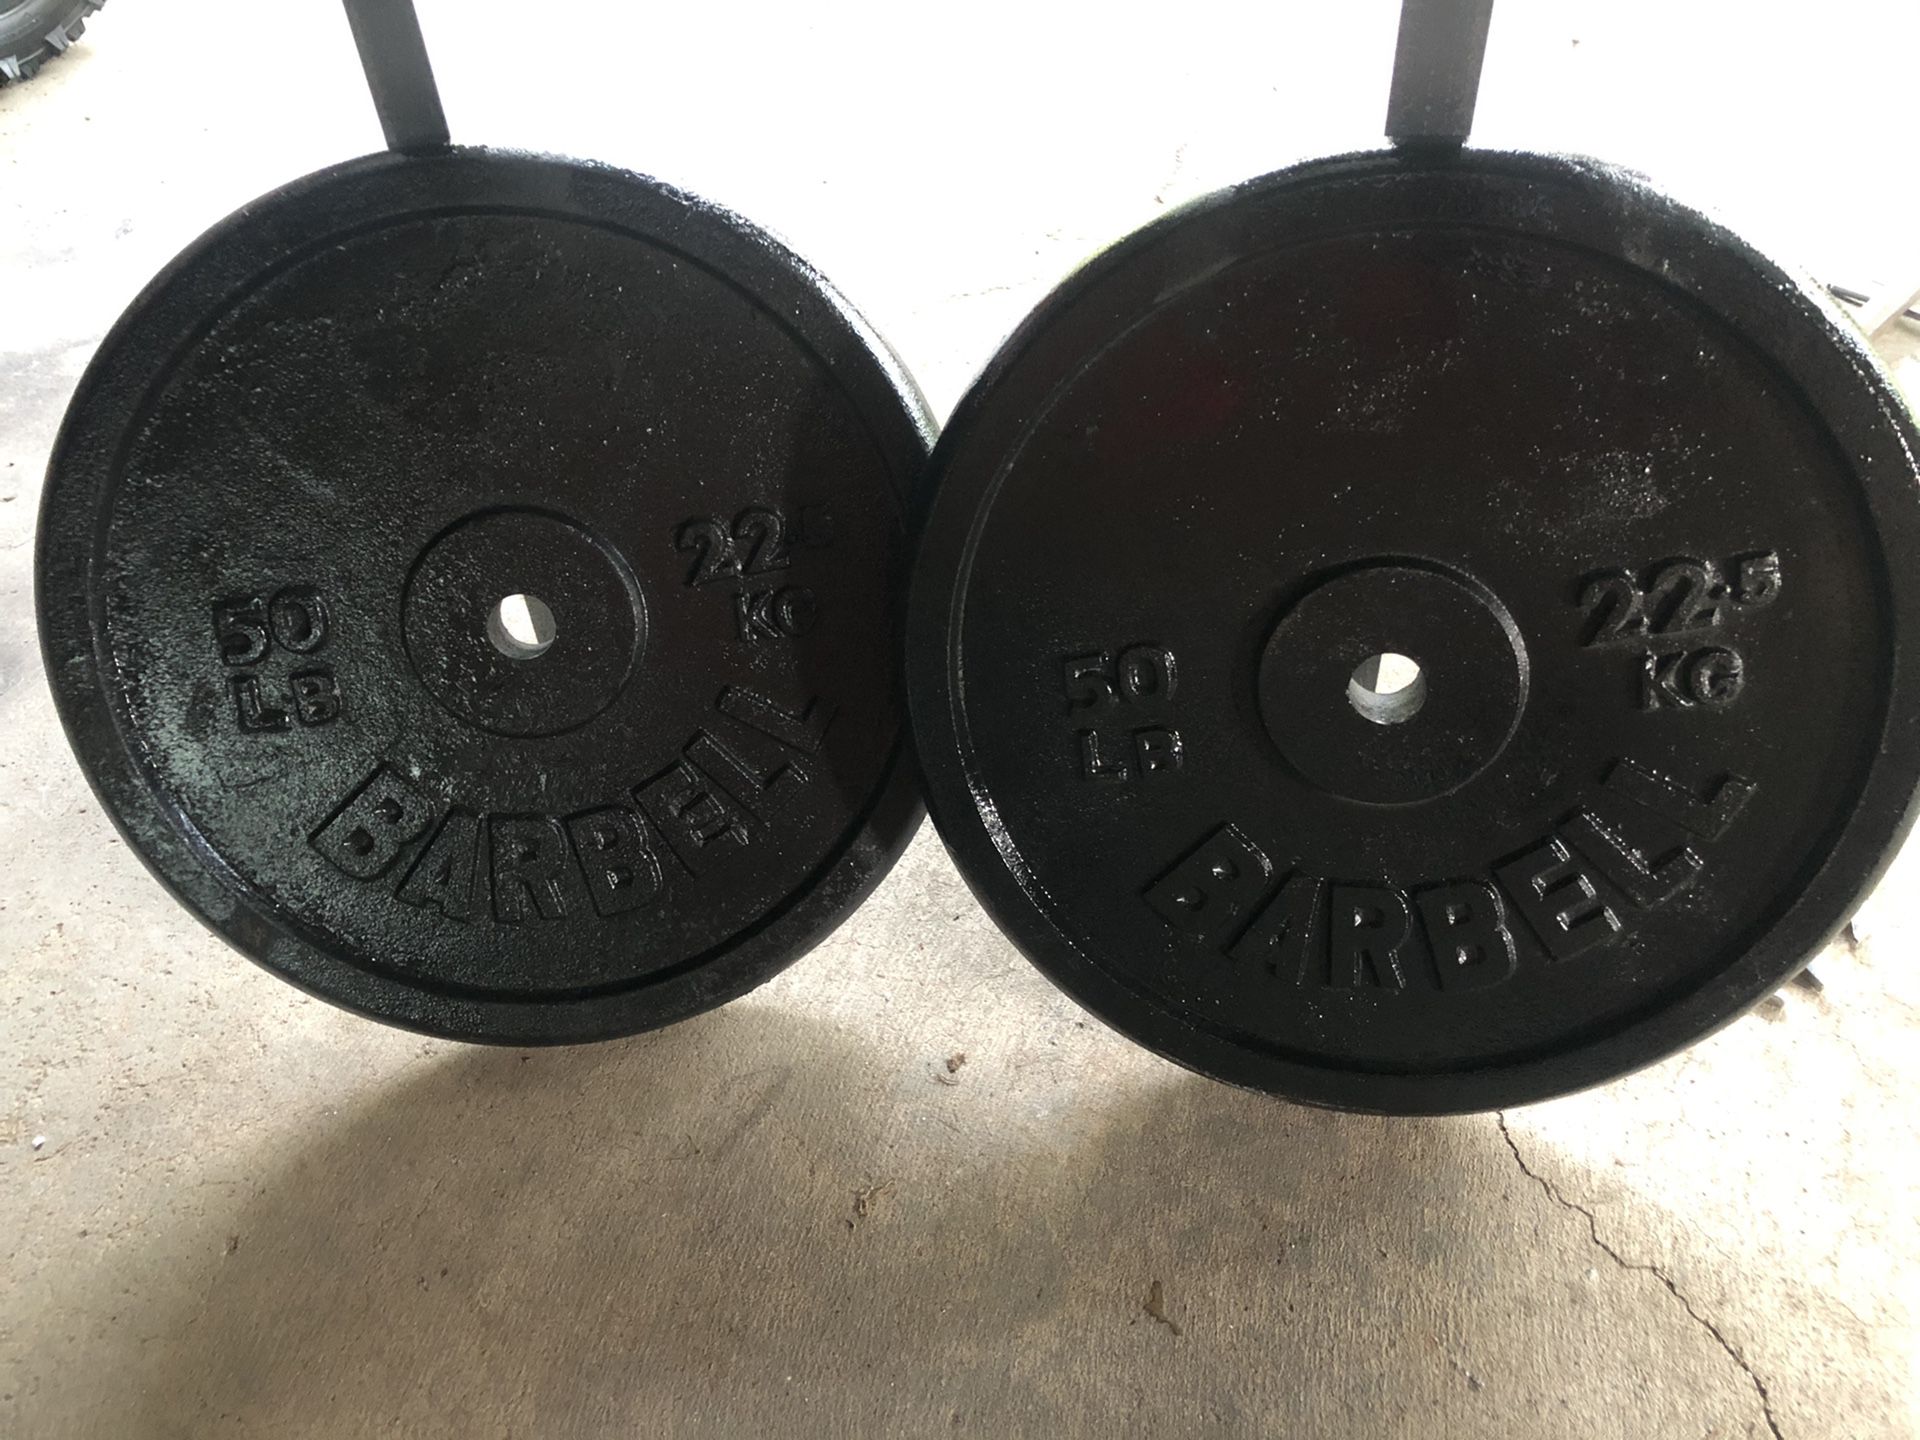 Pair of 50lb weights priced to sale quick.First come first served.Message when ready to pick them up.I will not hold them.